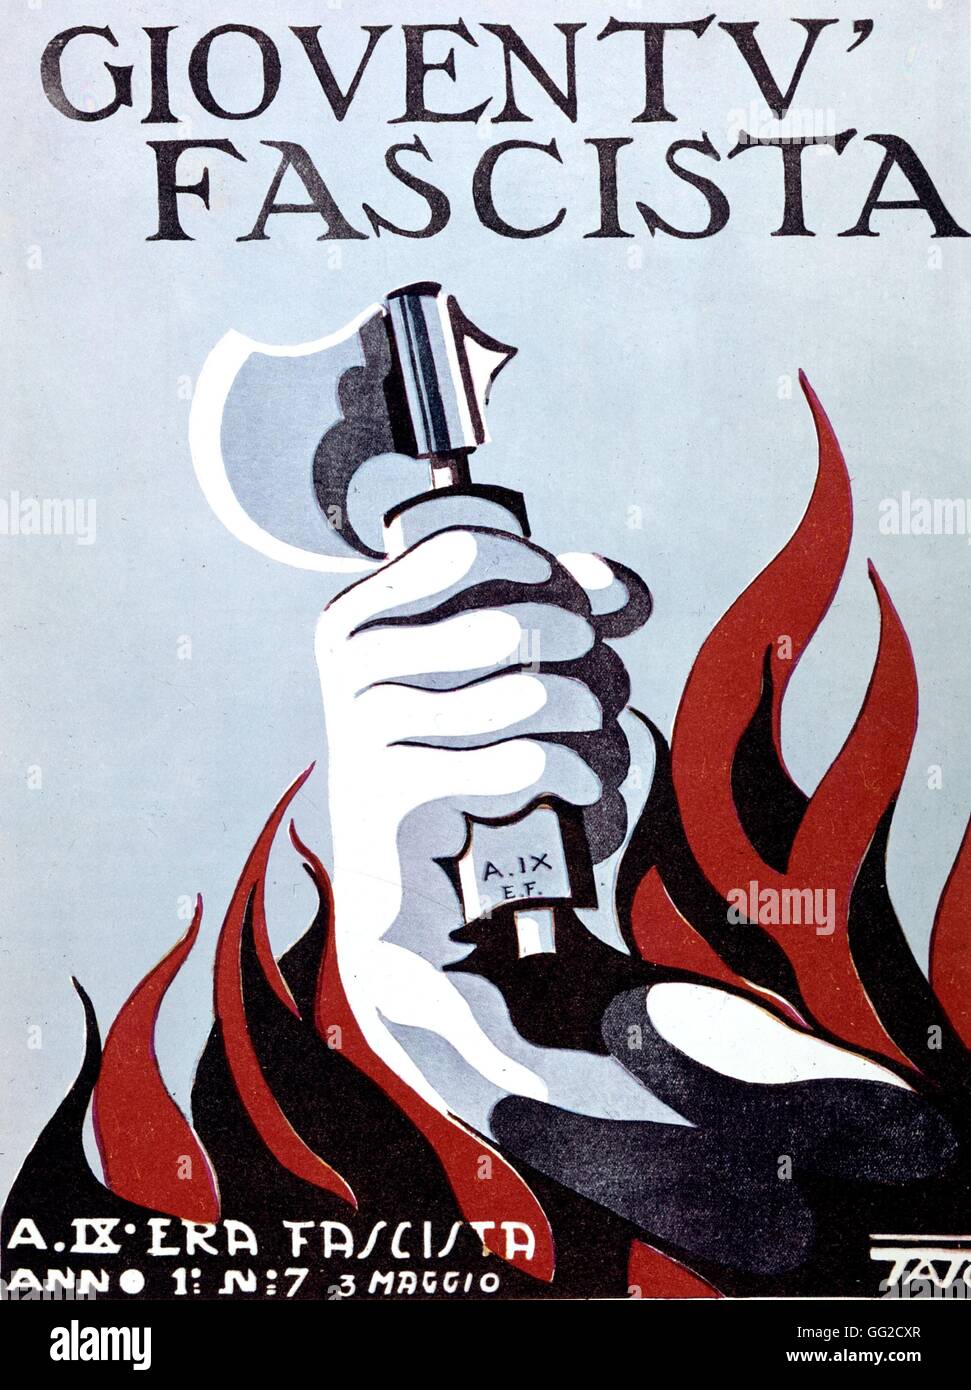 Drawing by Tato for the cover of the magazine 'Gioventu fascista' 1925 Italy Stock Photo